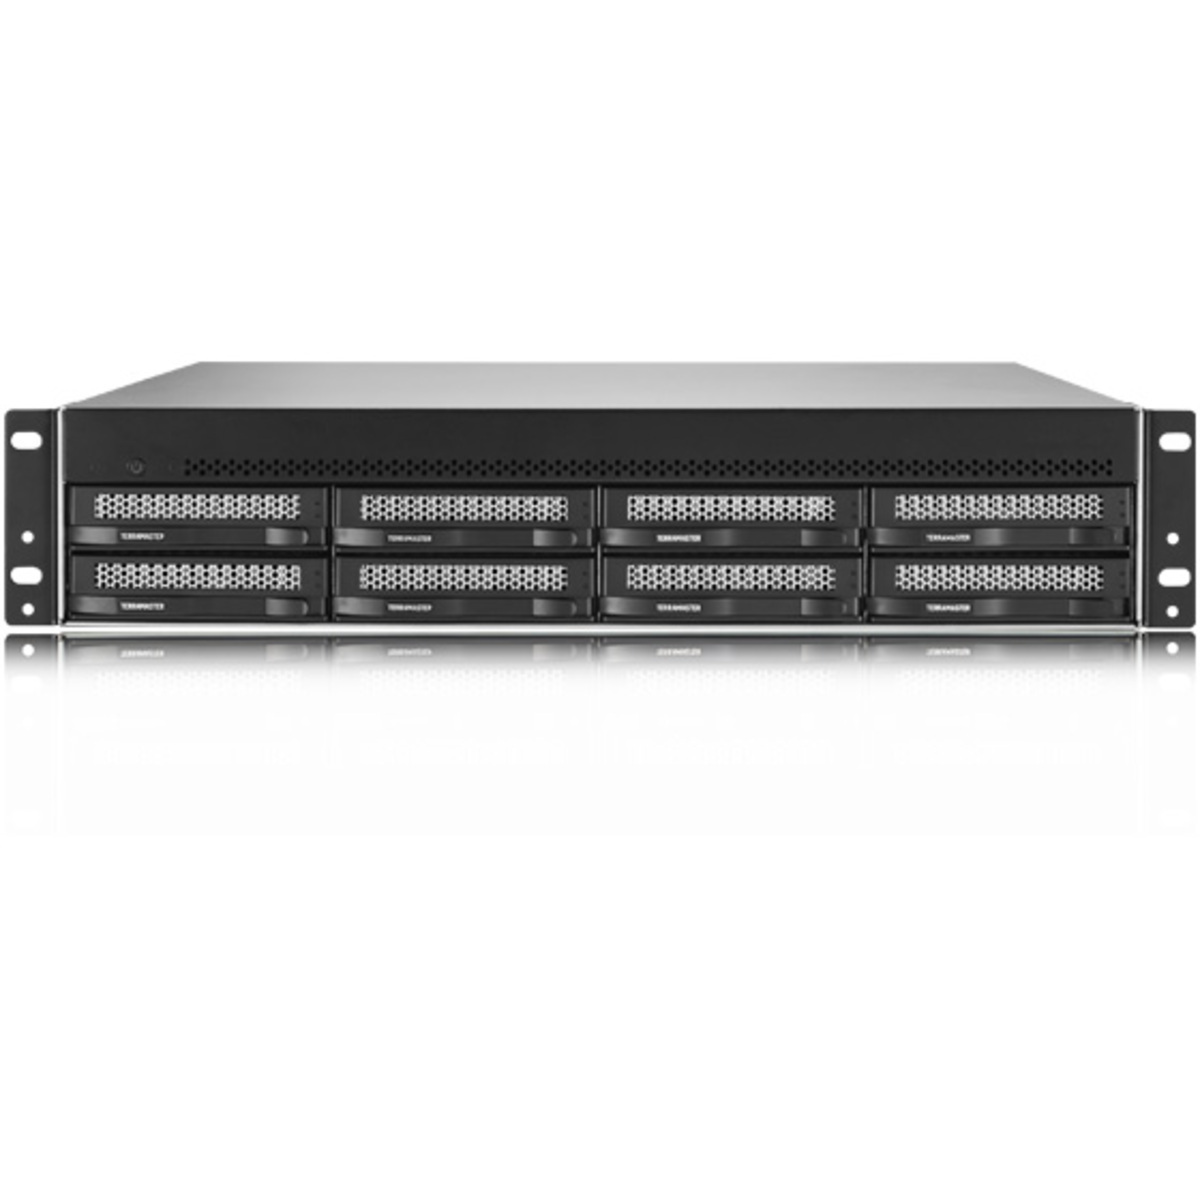 TerraMaster U8-450 192tb 8-Bay RackMount Multimedia / Power User / Business NAS - Network Attached Storage Device 8x24tb Western Digital Red Pro WD240KFGX 3.5 7200rpm SATA 6Gb/s HDD NAS Class Drives Installed - Burn-In Tested U8-450